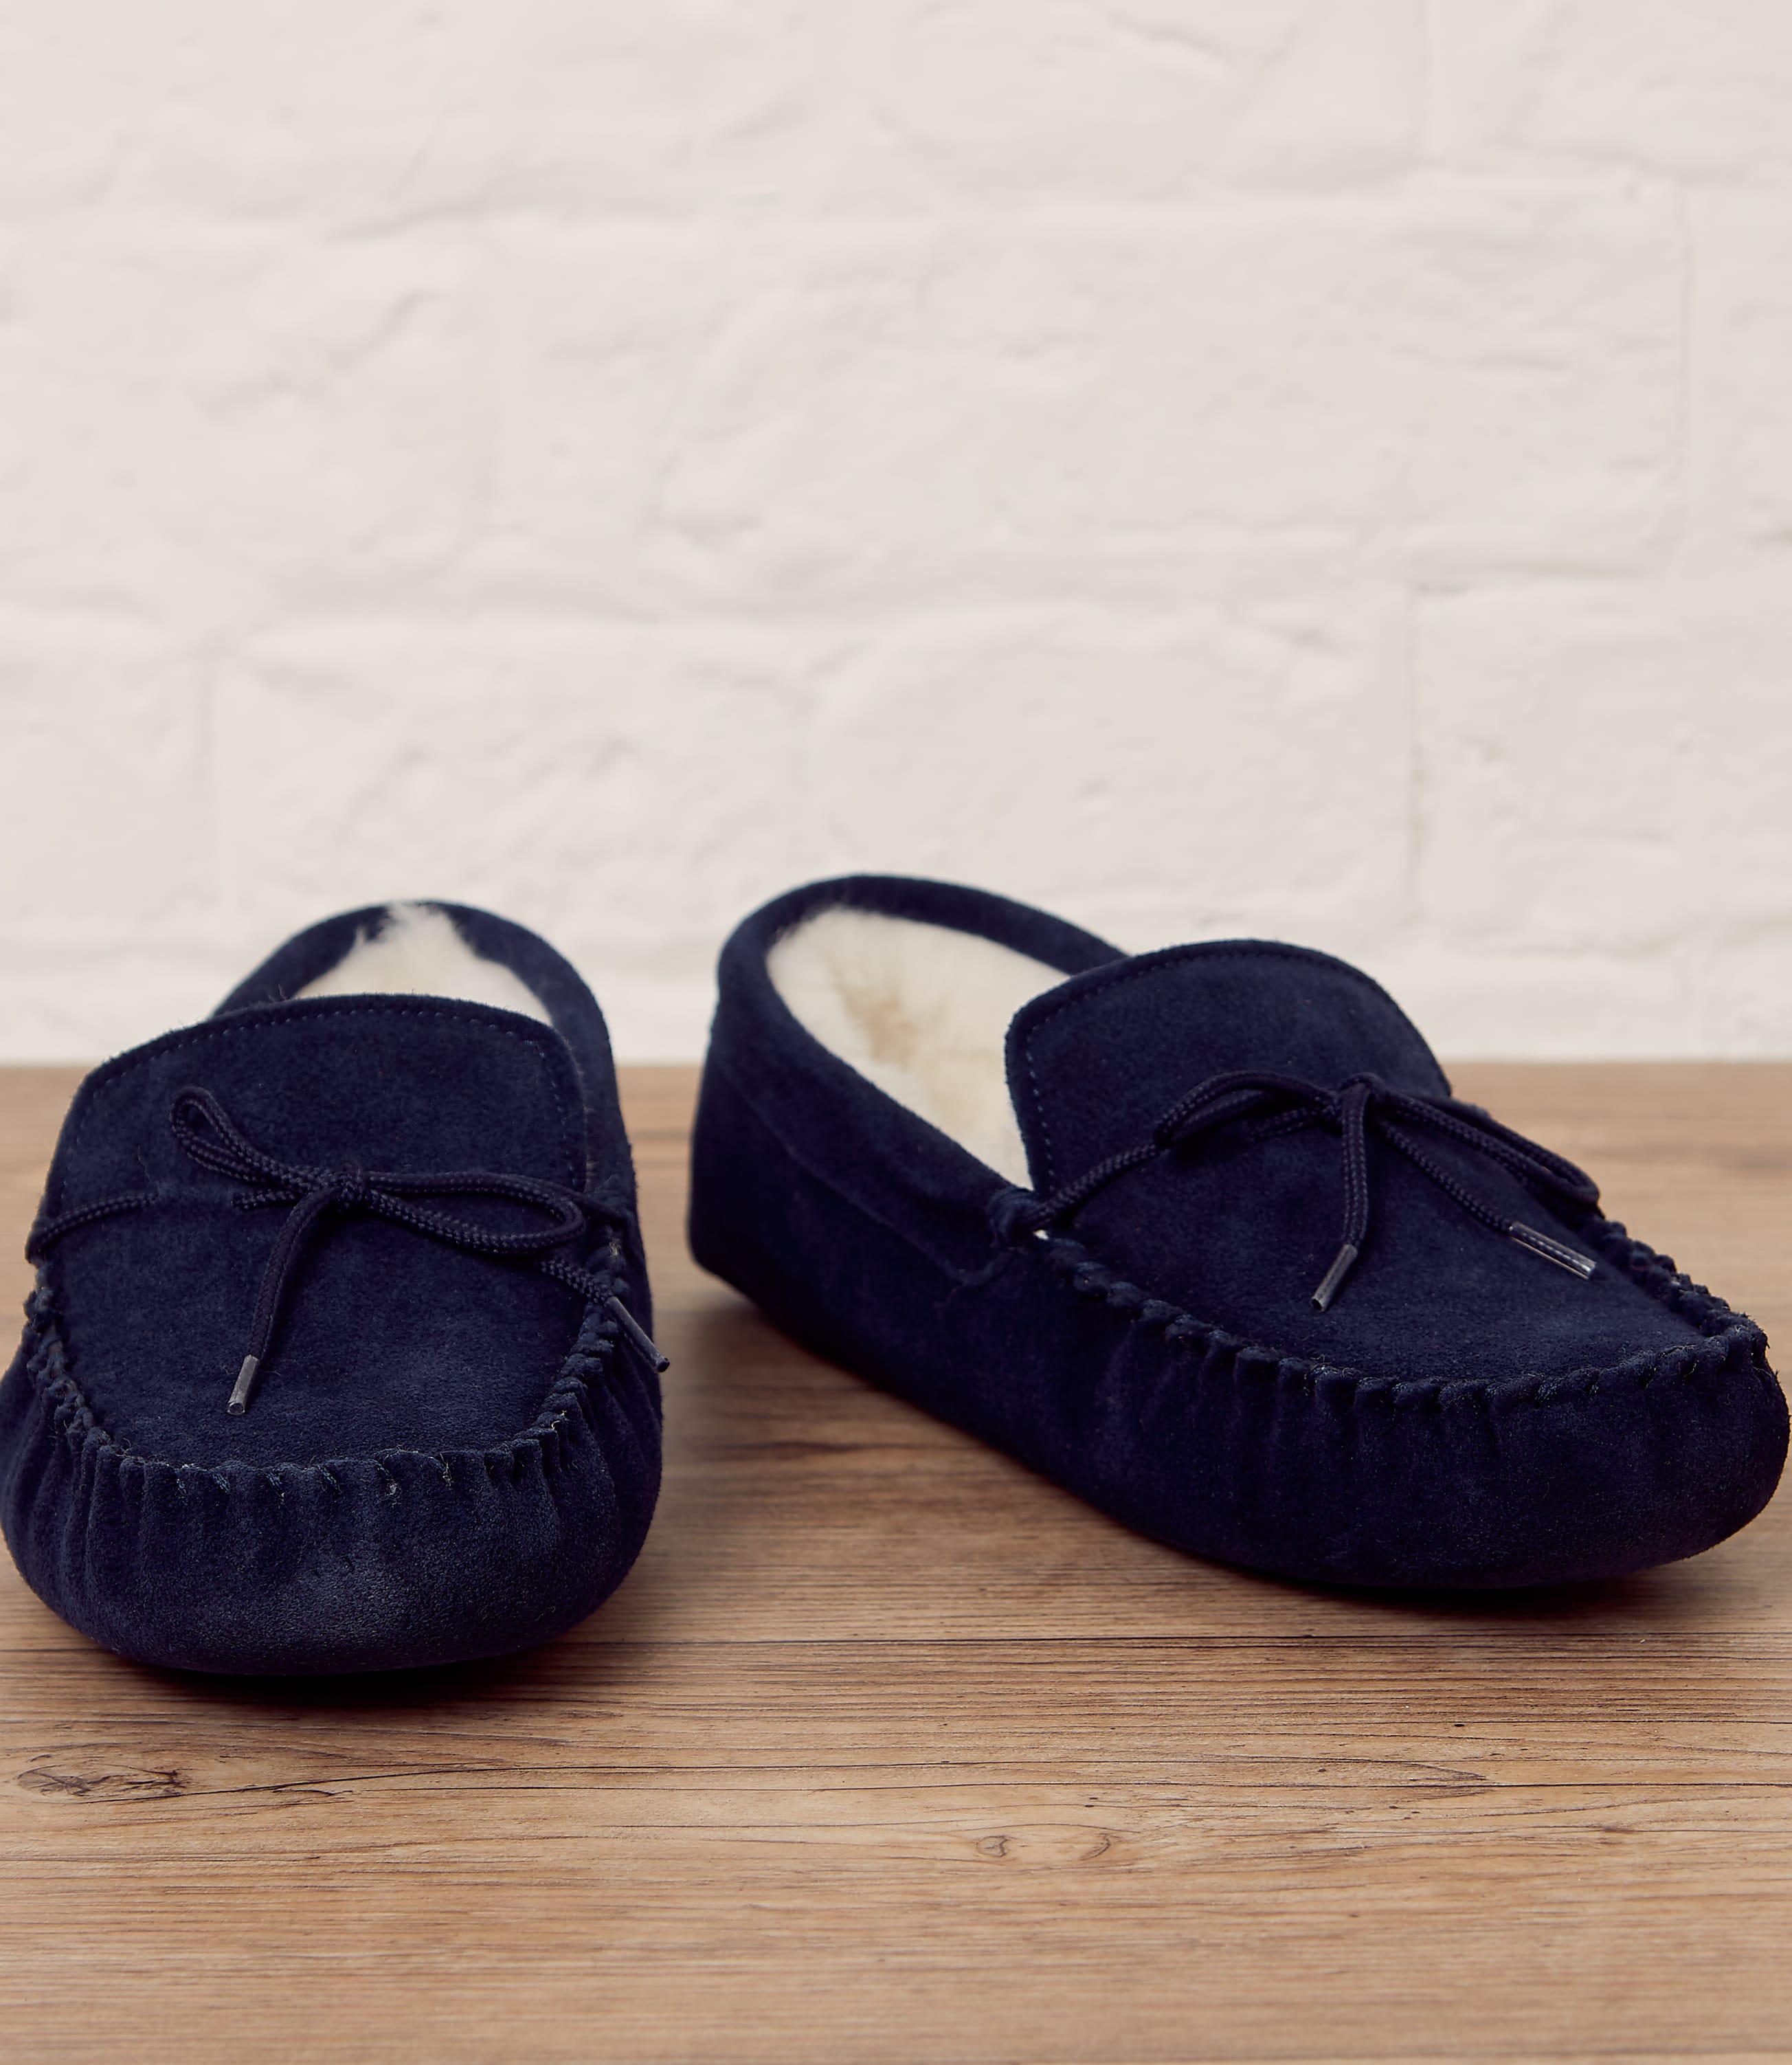 lambswool moccasin slippers